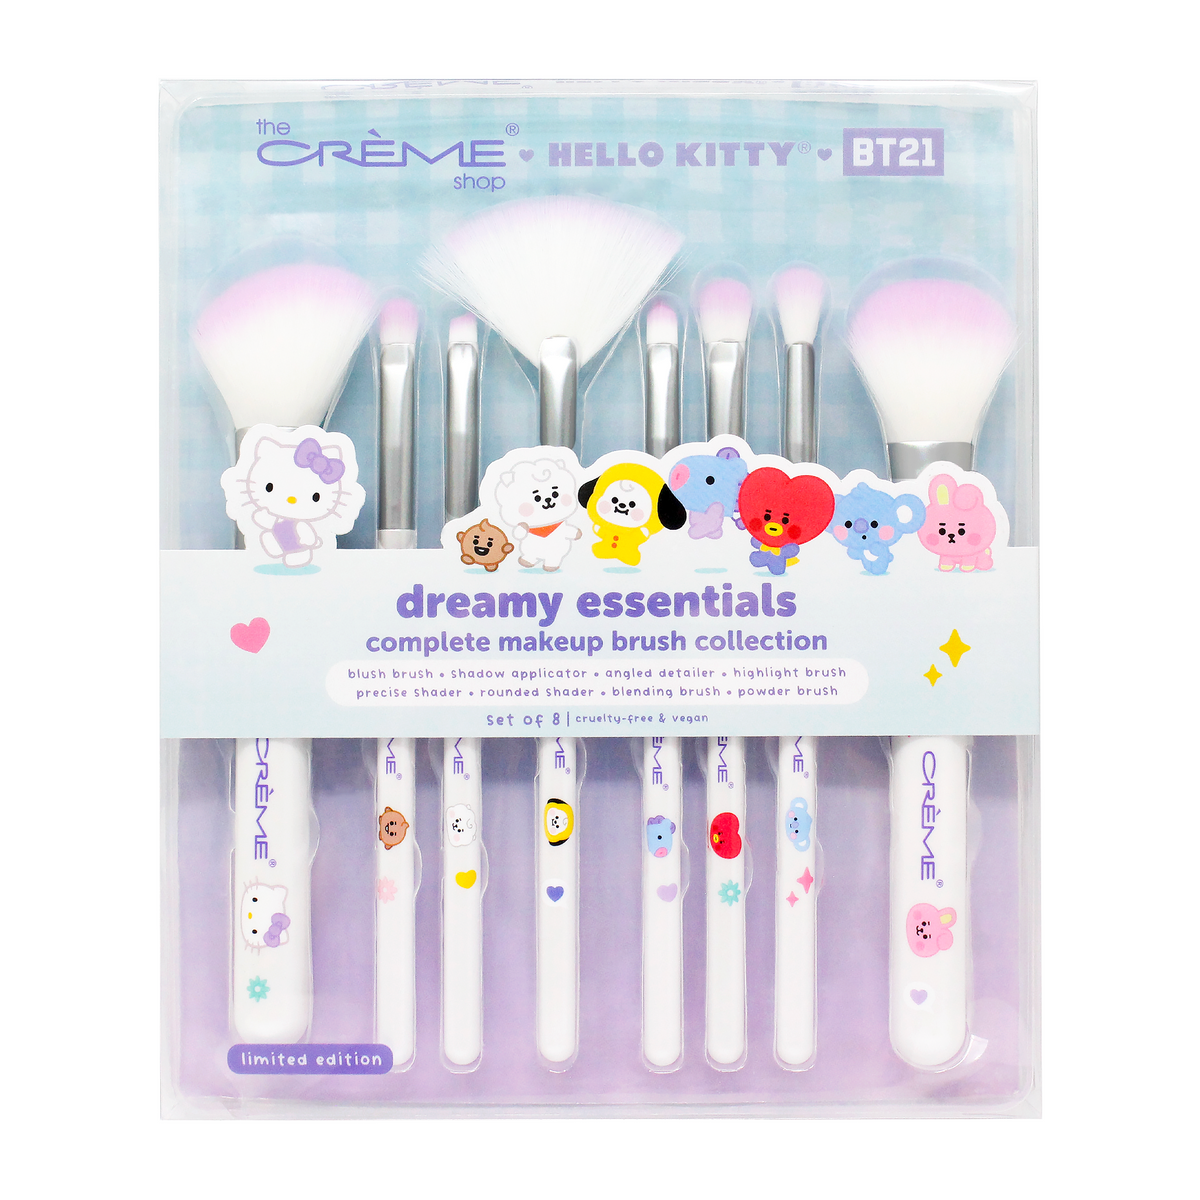 Hello Kitty &amp; BT21 Dreamy Essentials Makeup Brush Collection (Set of 8) Beauty The Crème Shop   